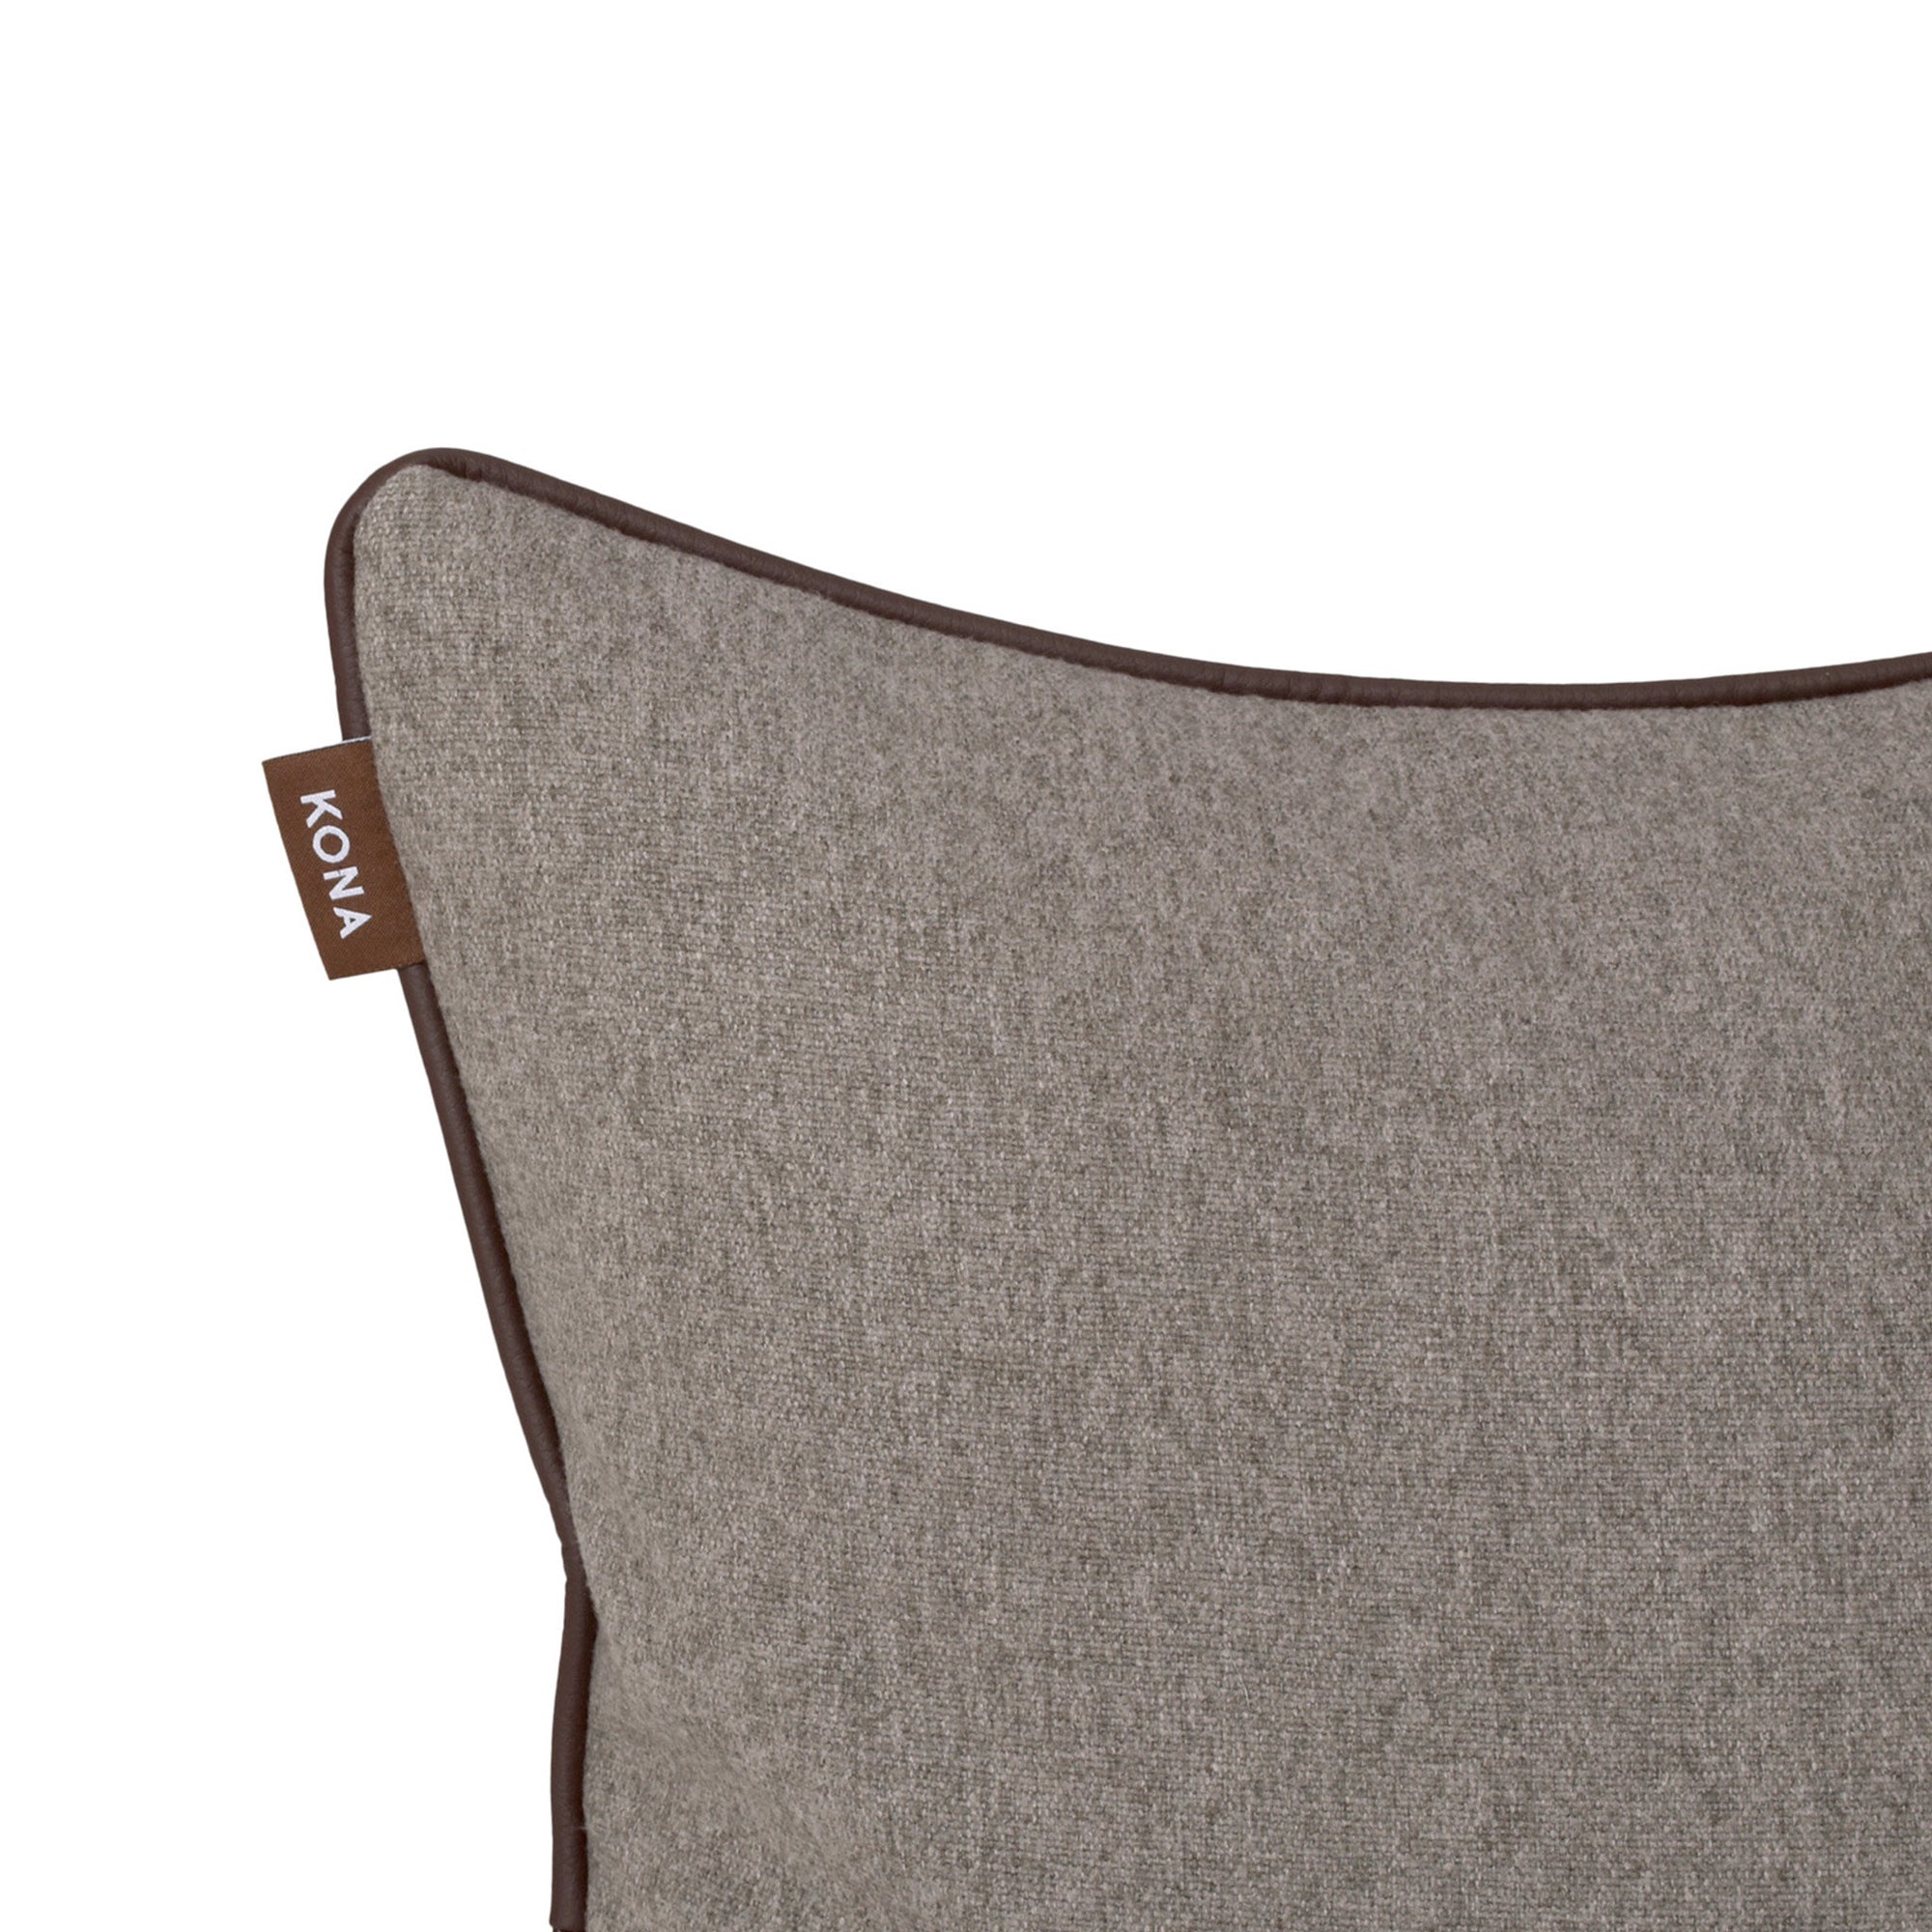 KONA CAVE® Decorative pillow covers, elegant grey flannel with leather trim.